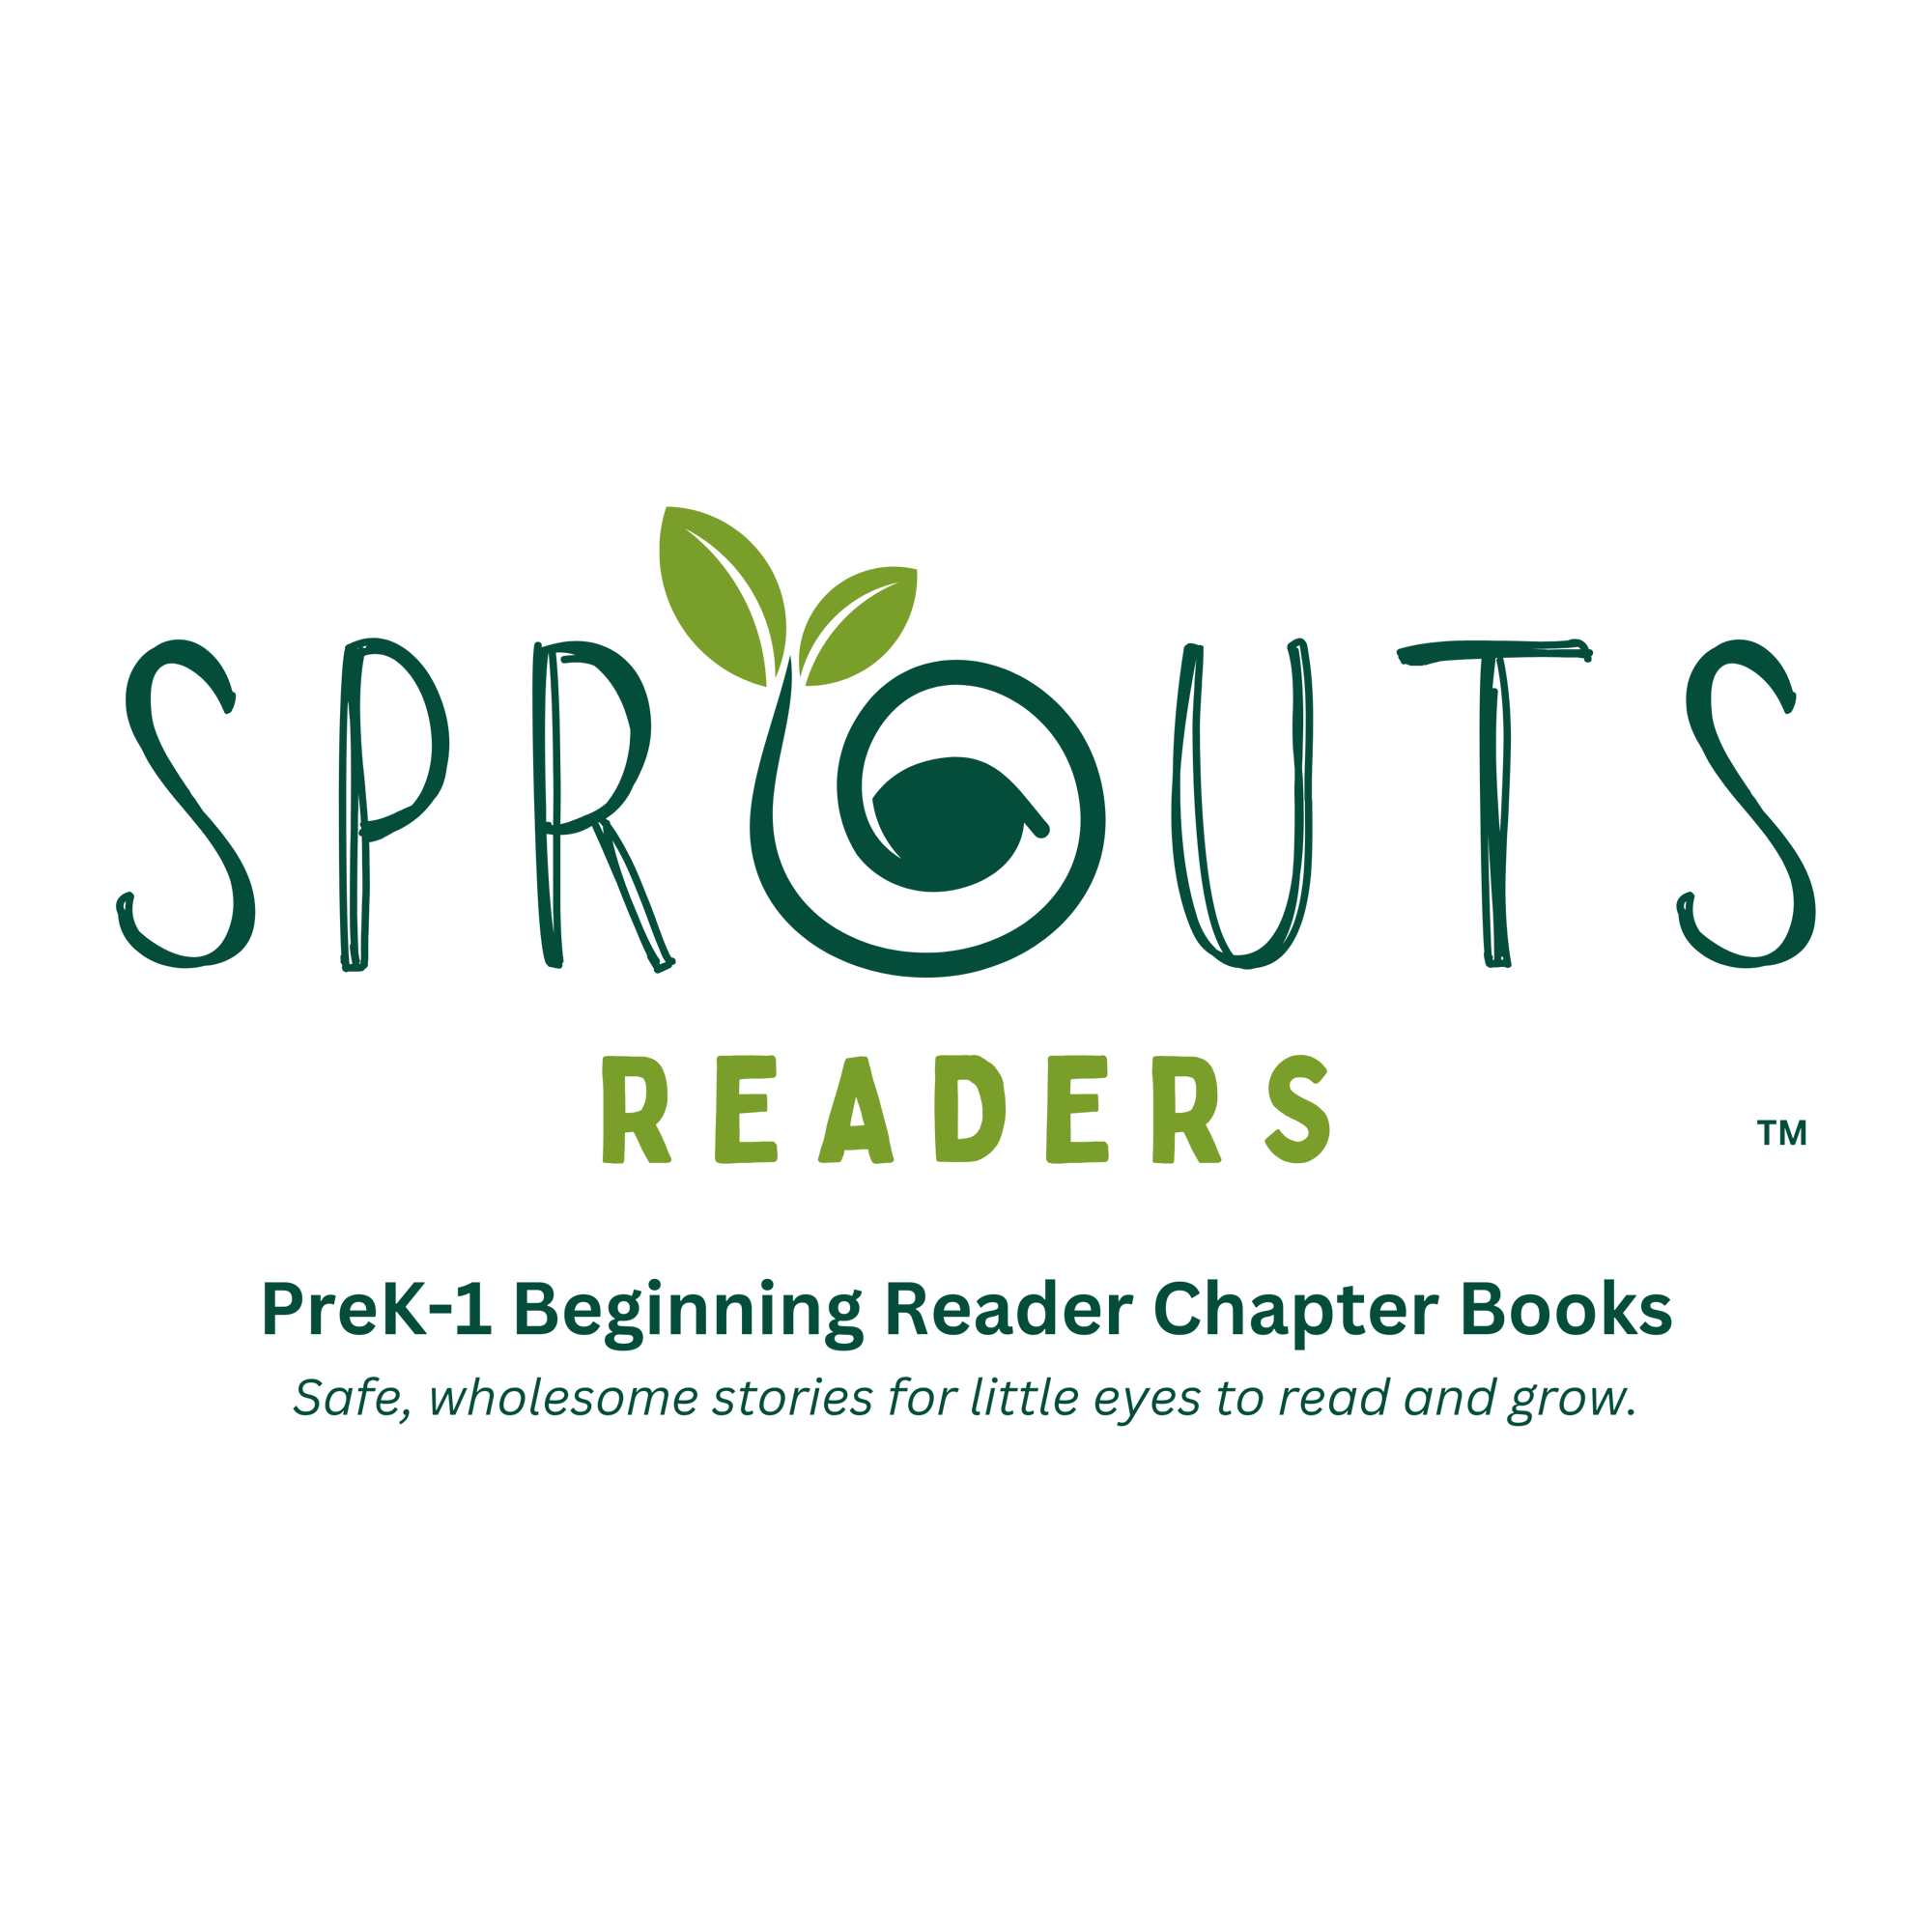 Srpouts Readers